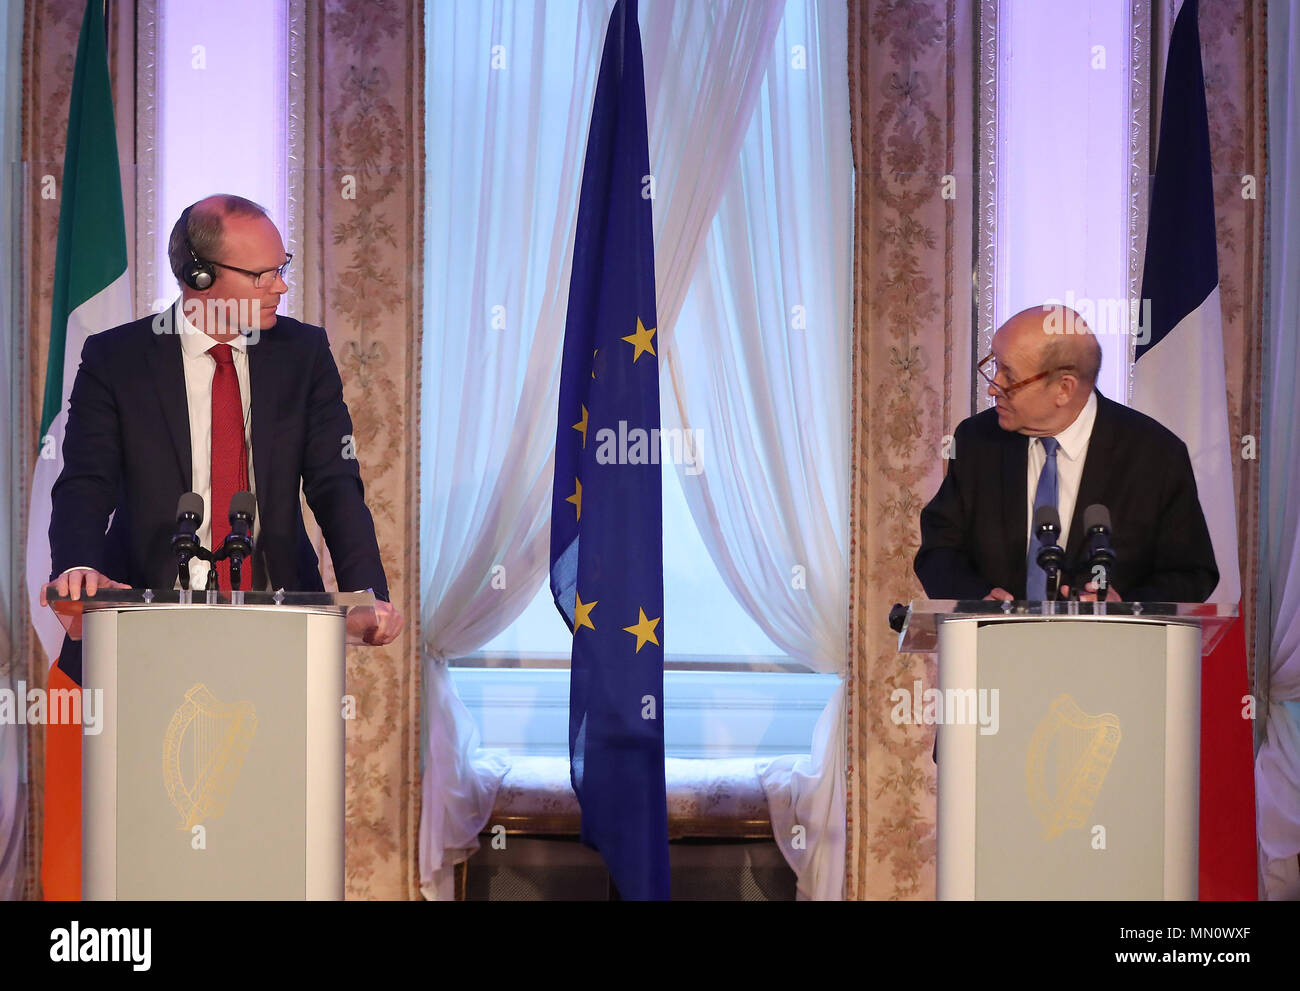 The T‡naiste and Minister for Foreign Affairs and Trade, Simon Coveney T.D (left) with French Minister for Europe and Foreign Affairs, Jean-Yves Le Drian at a press conference at Farmleigh House in Phoenix Park, Dublin. Stock Photo